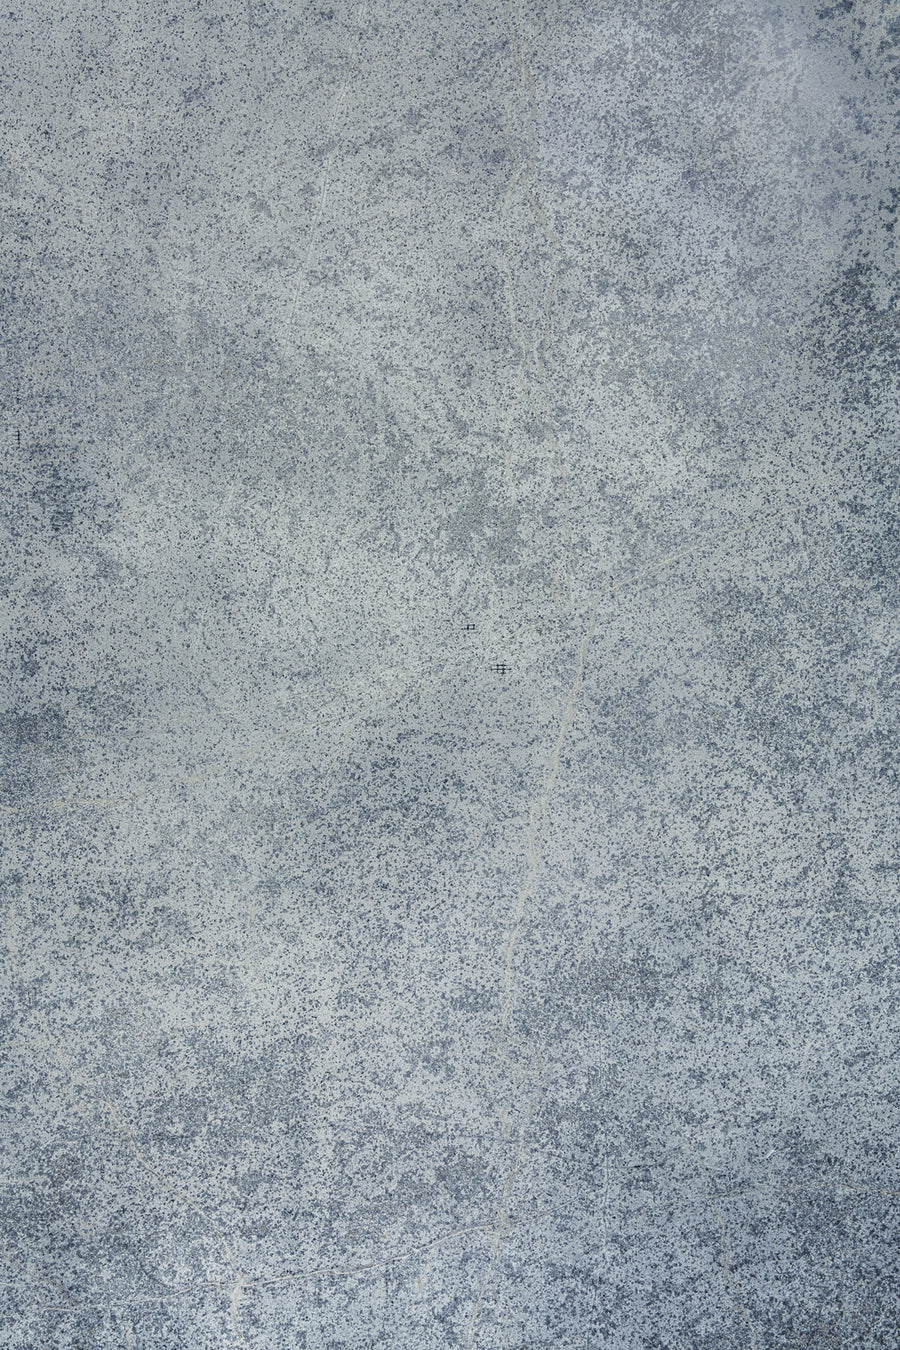 Rustic blue-gray stone photography surface